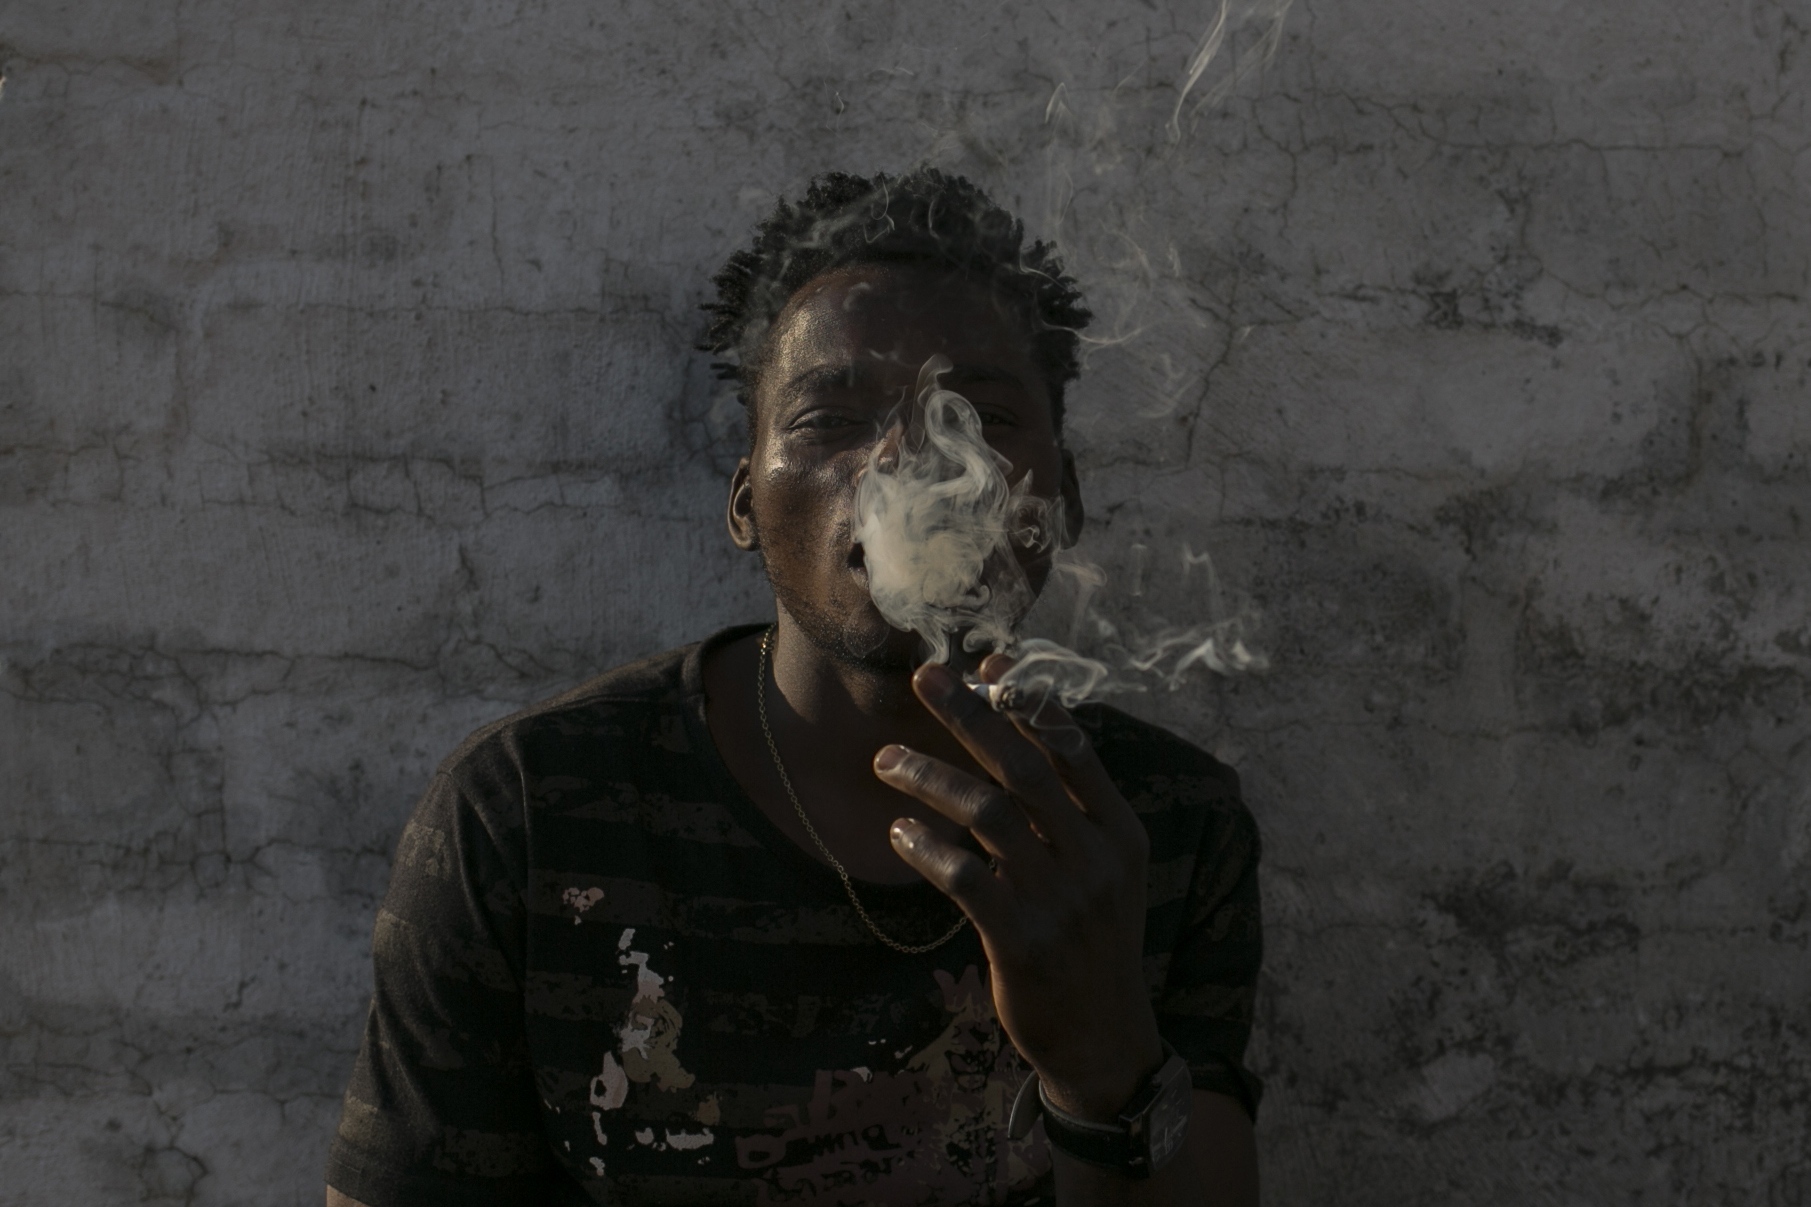 Malawian migrant Jonas smokes marihuana on the rooftop of an abandoned building. March 29, 2018.